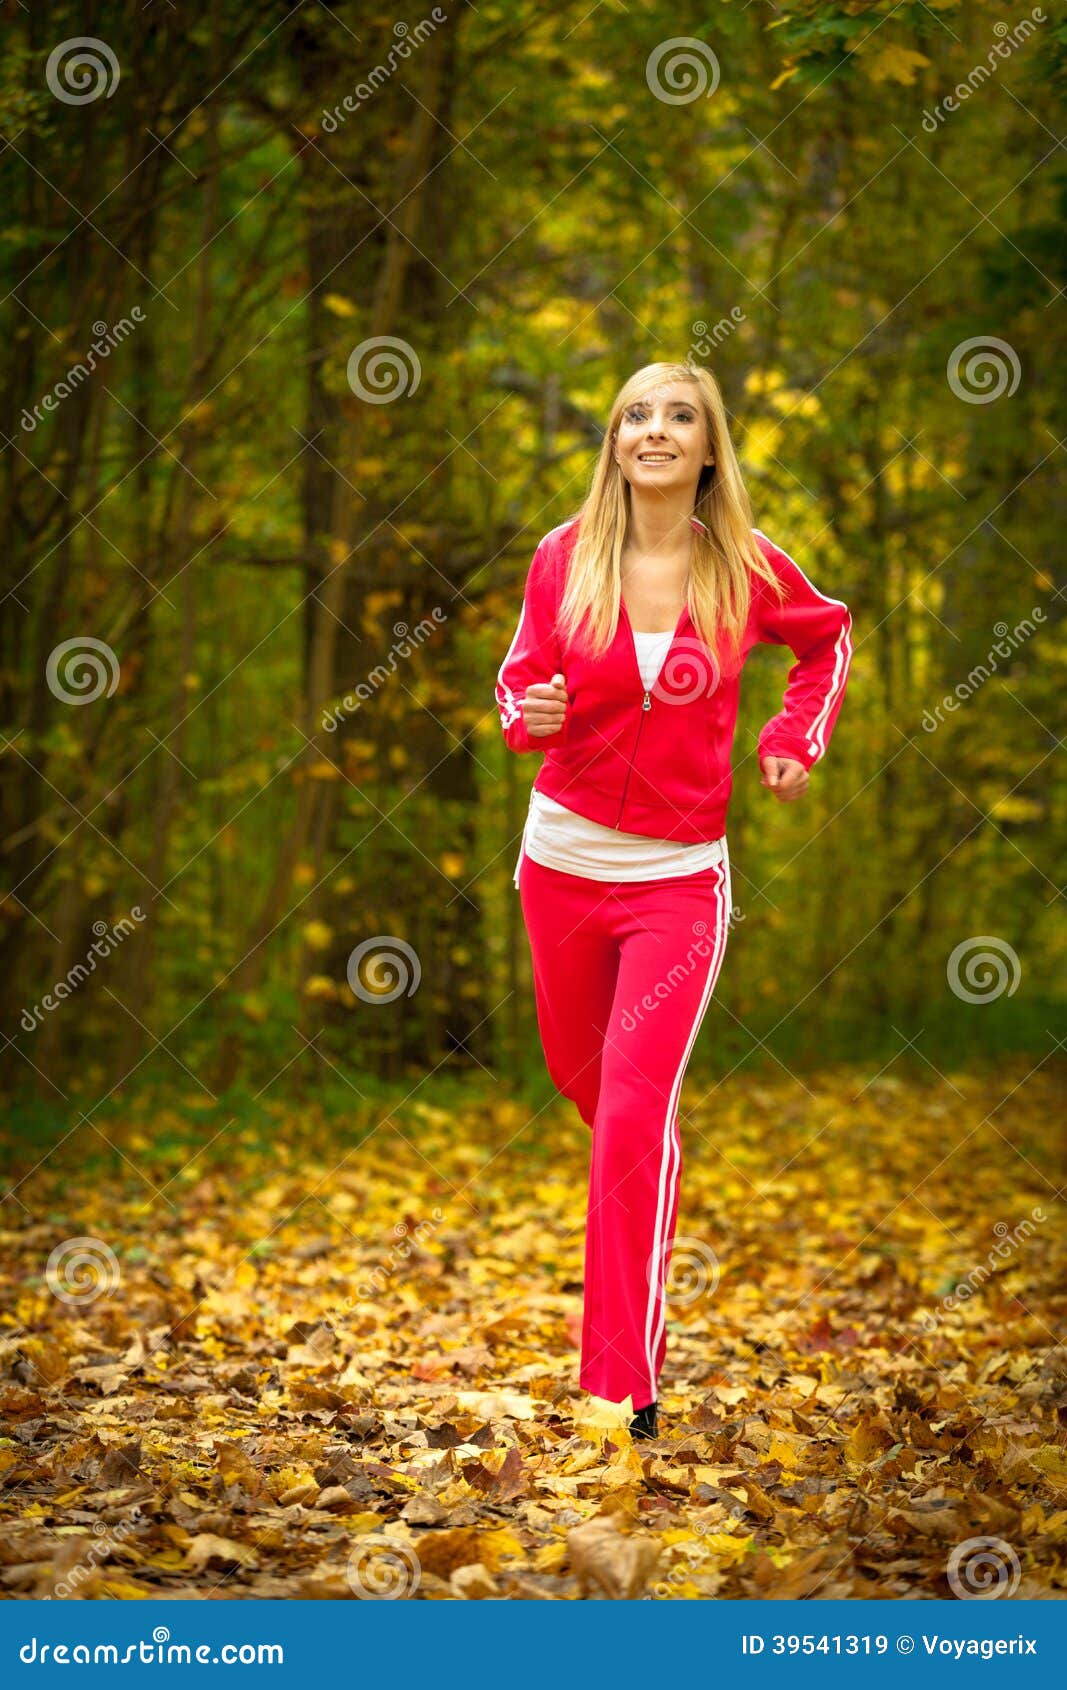 Blonde Girl Young Woman Running Jogging in Autumn Fall Forest Park ...